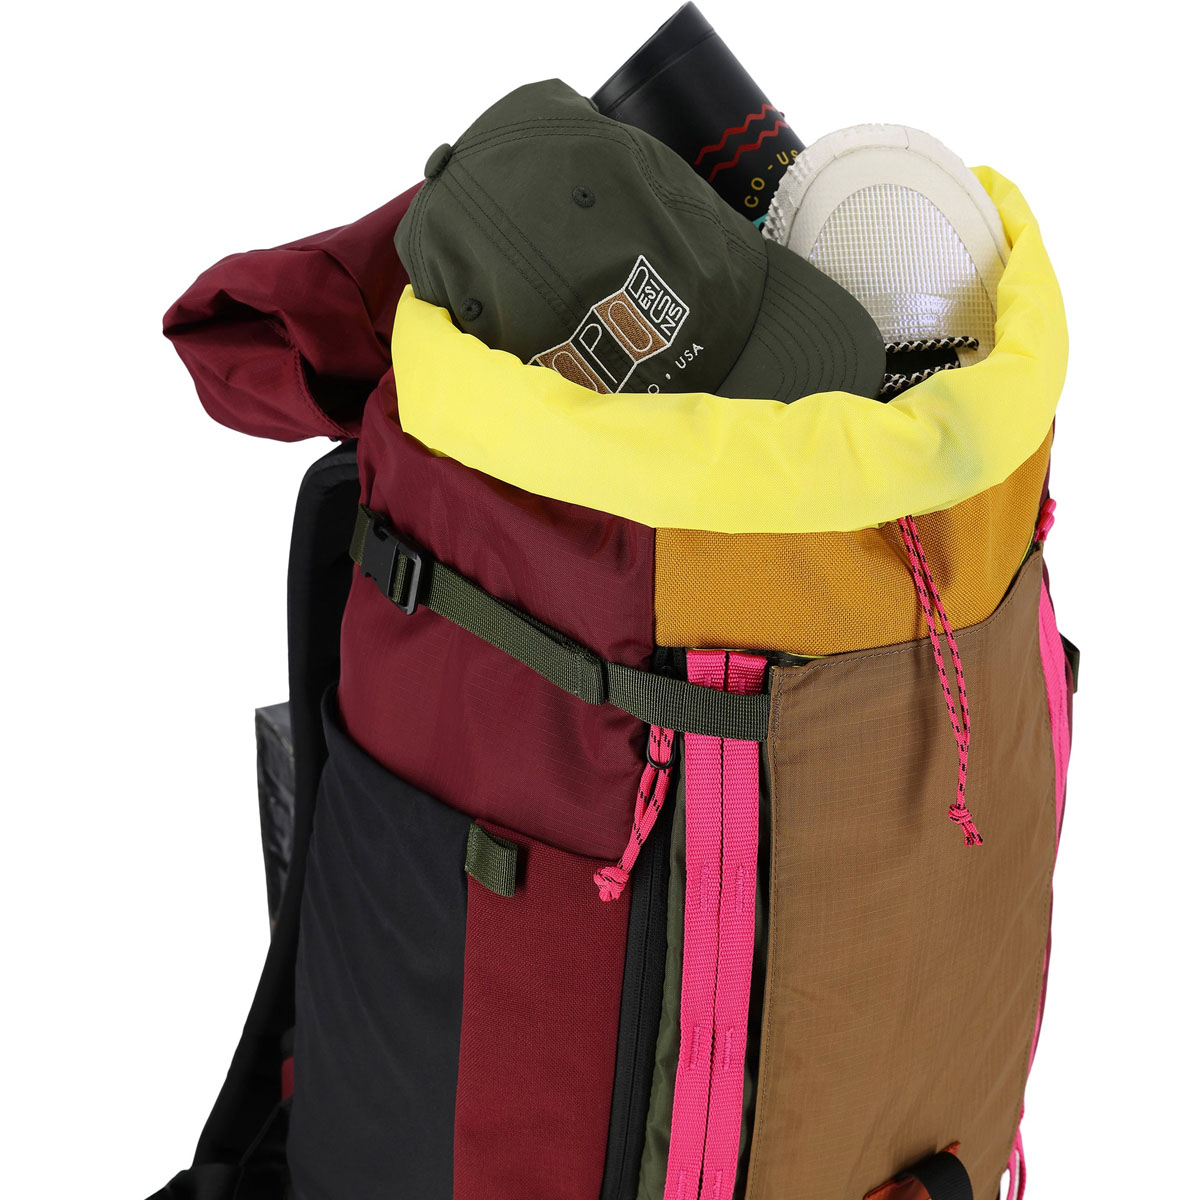 Topo Designs Mountain Pack 28L, inside, water resistant lining with a striking bright color